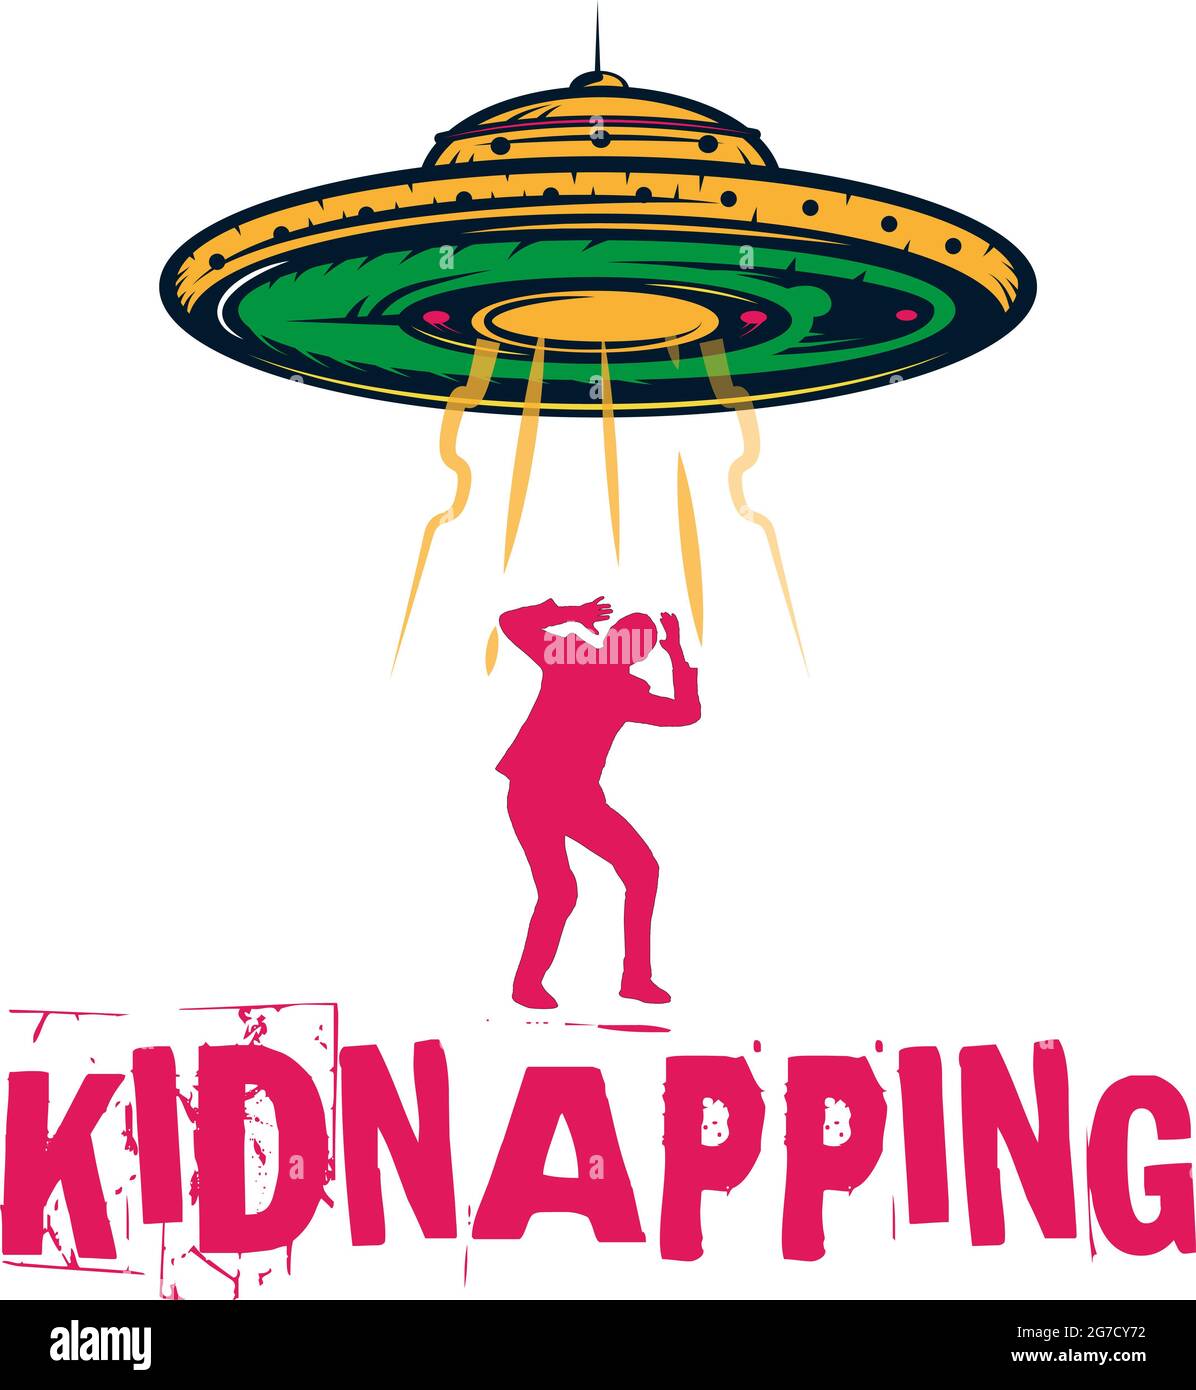 Alien Kidnapping Human being Stock Photo